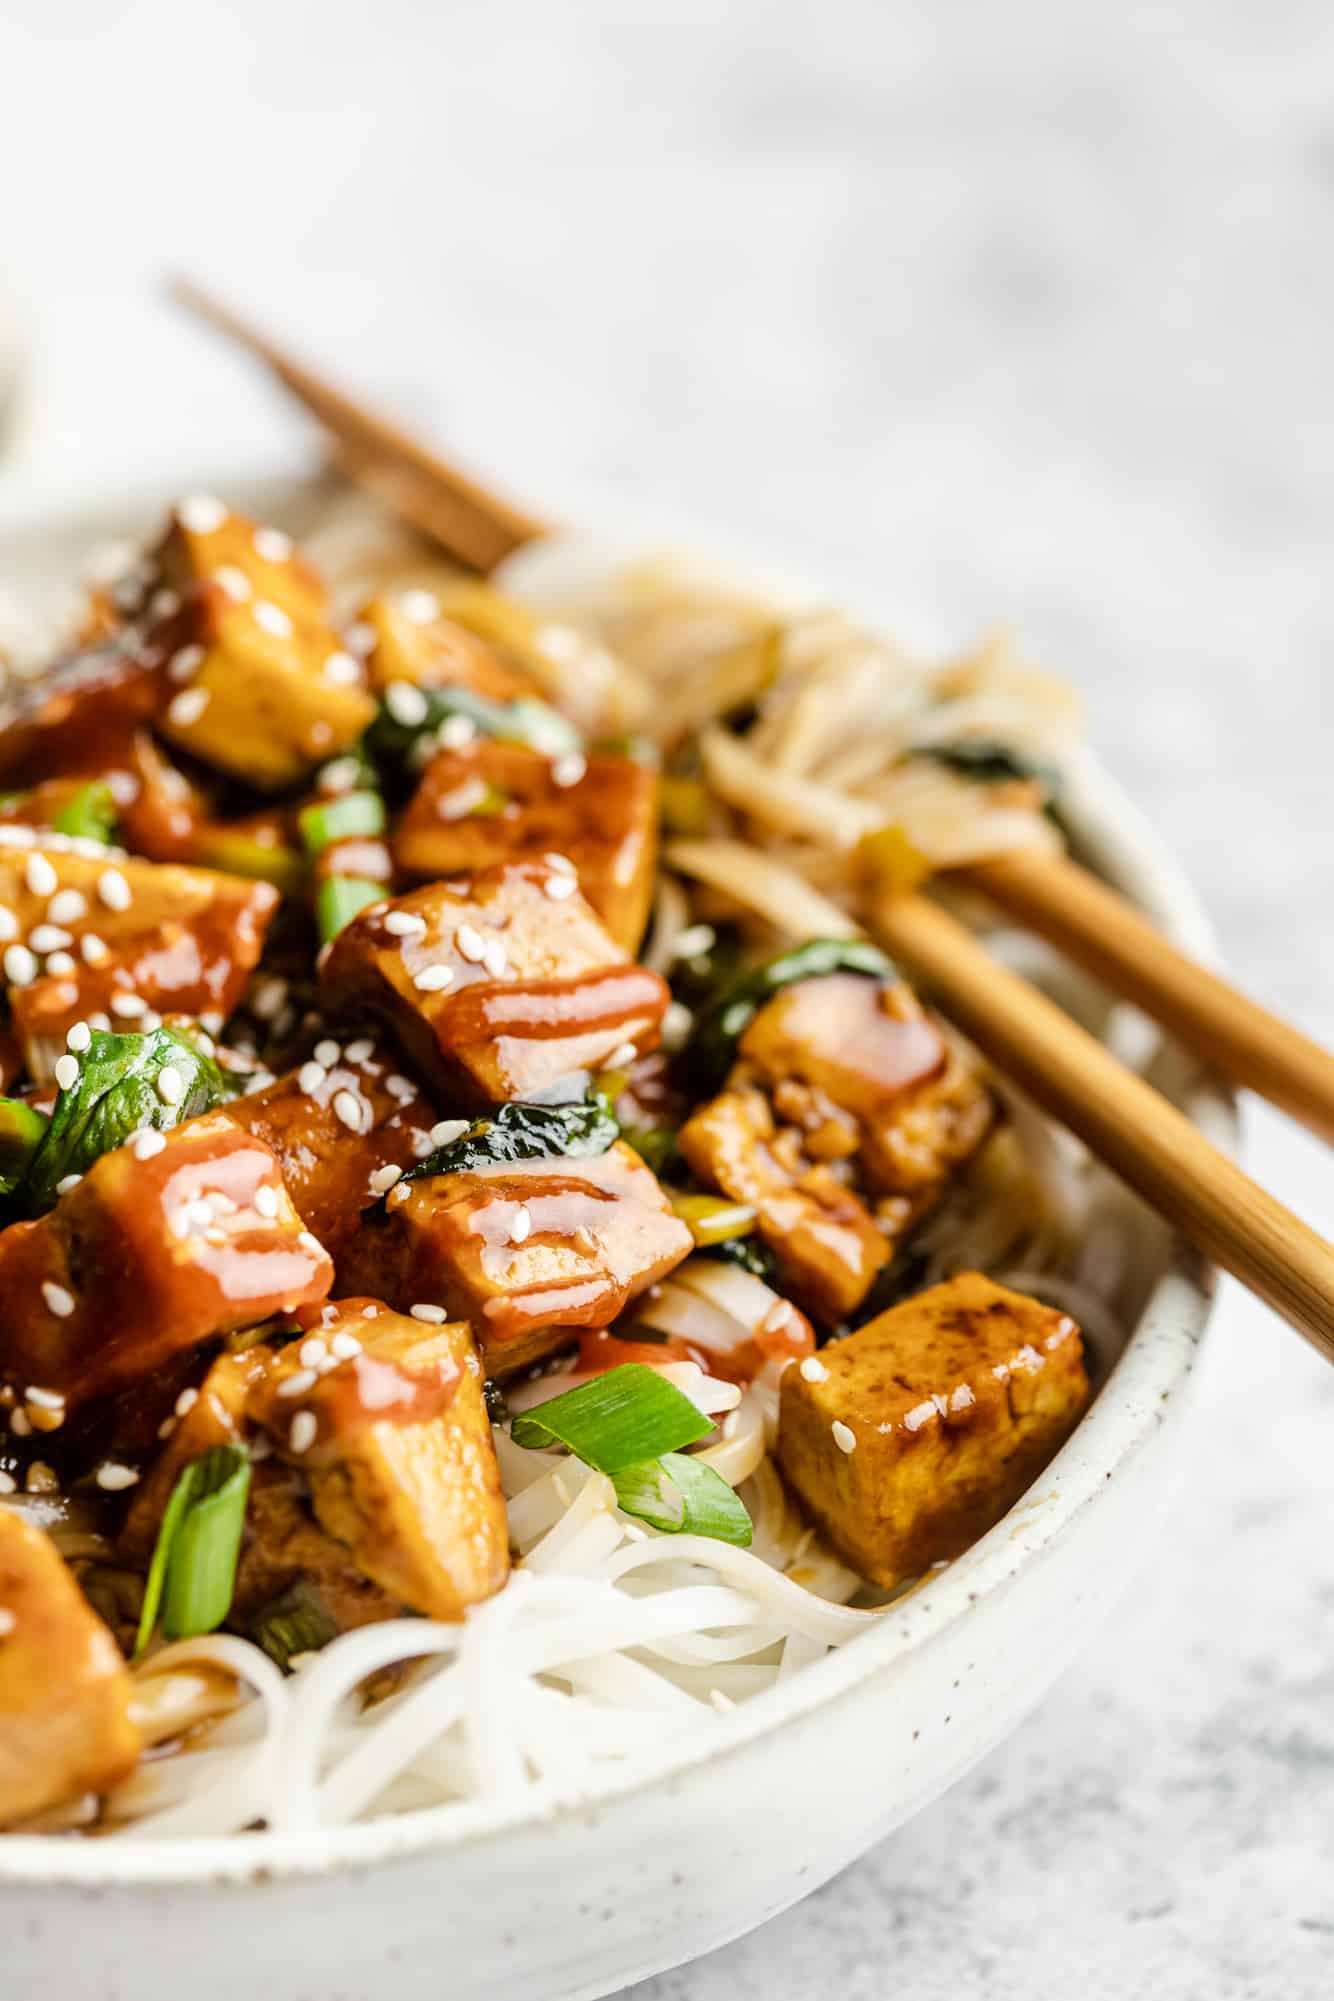 How to Fry Tofu - Food with Feeling